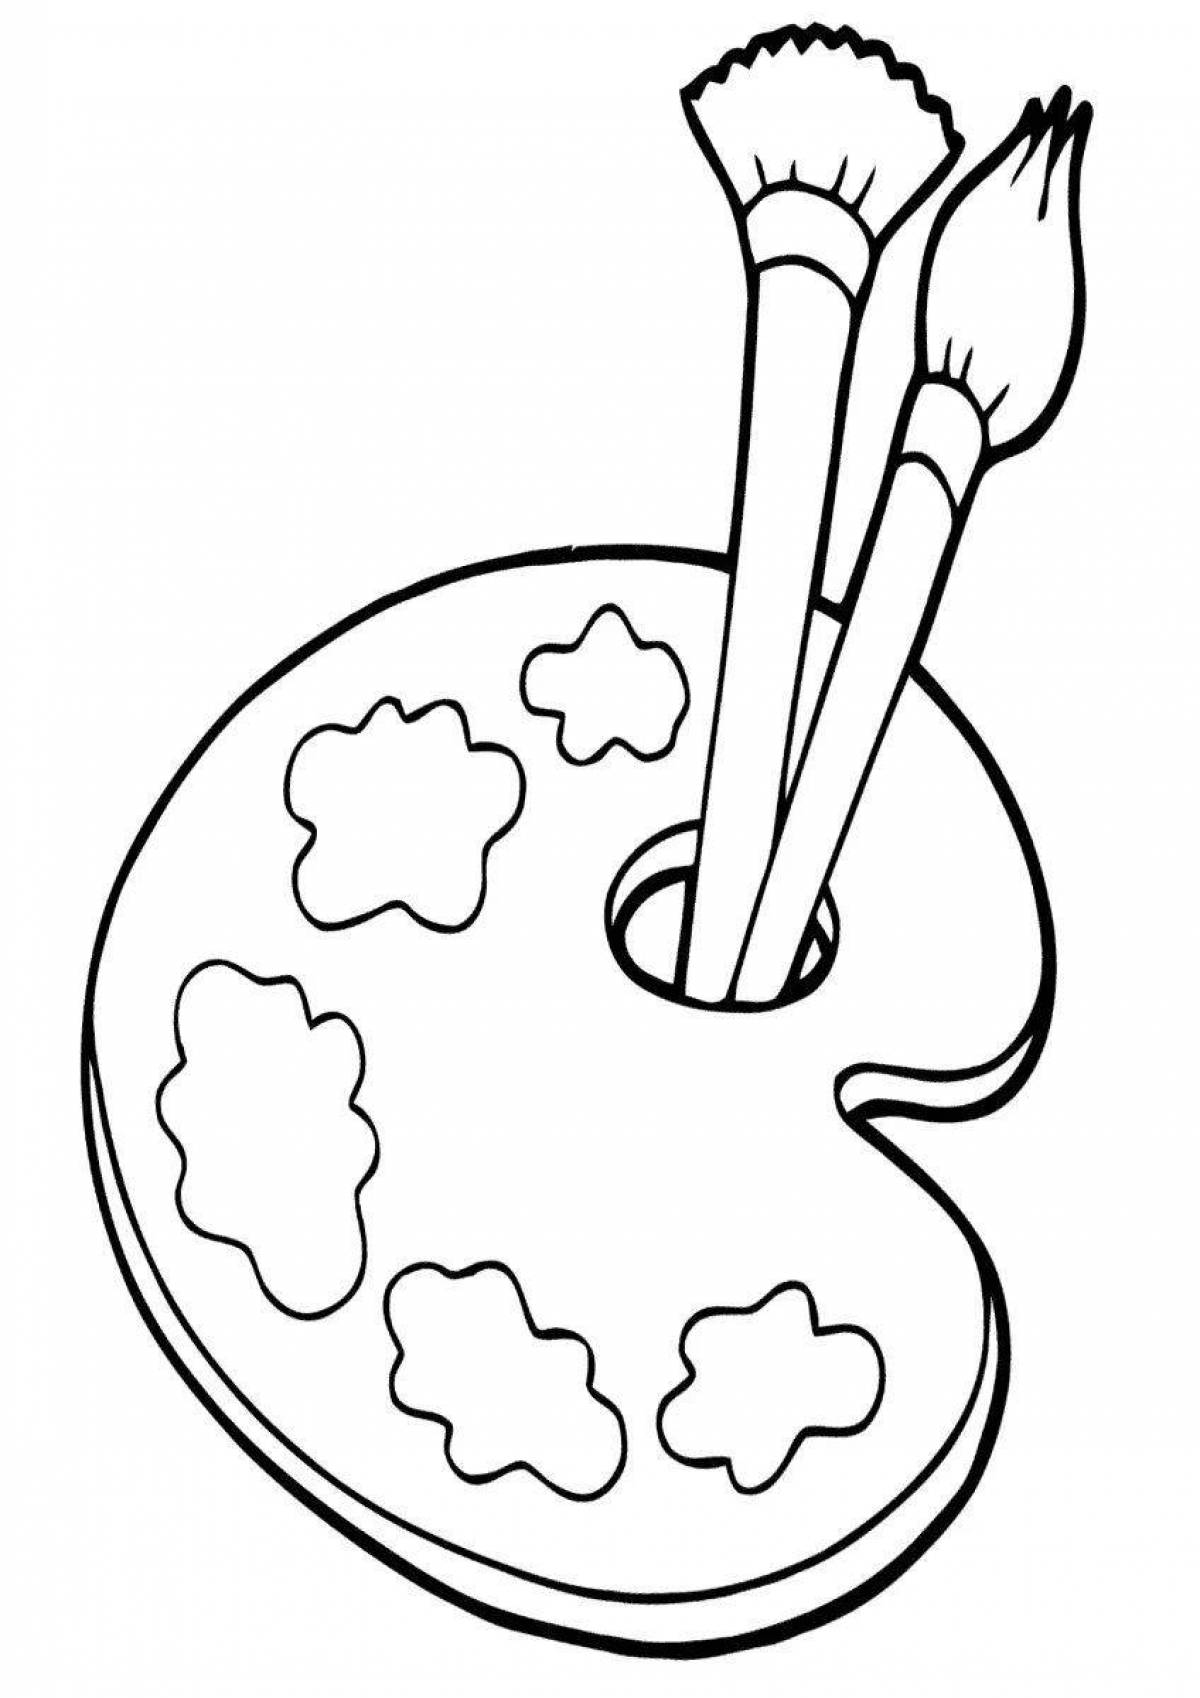 Coloring-illustrator paints and brushes coloring page